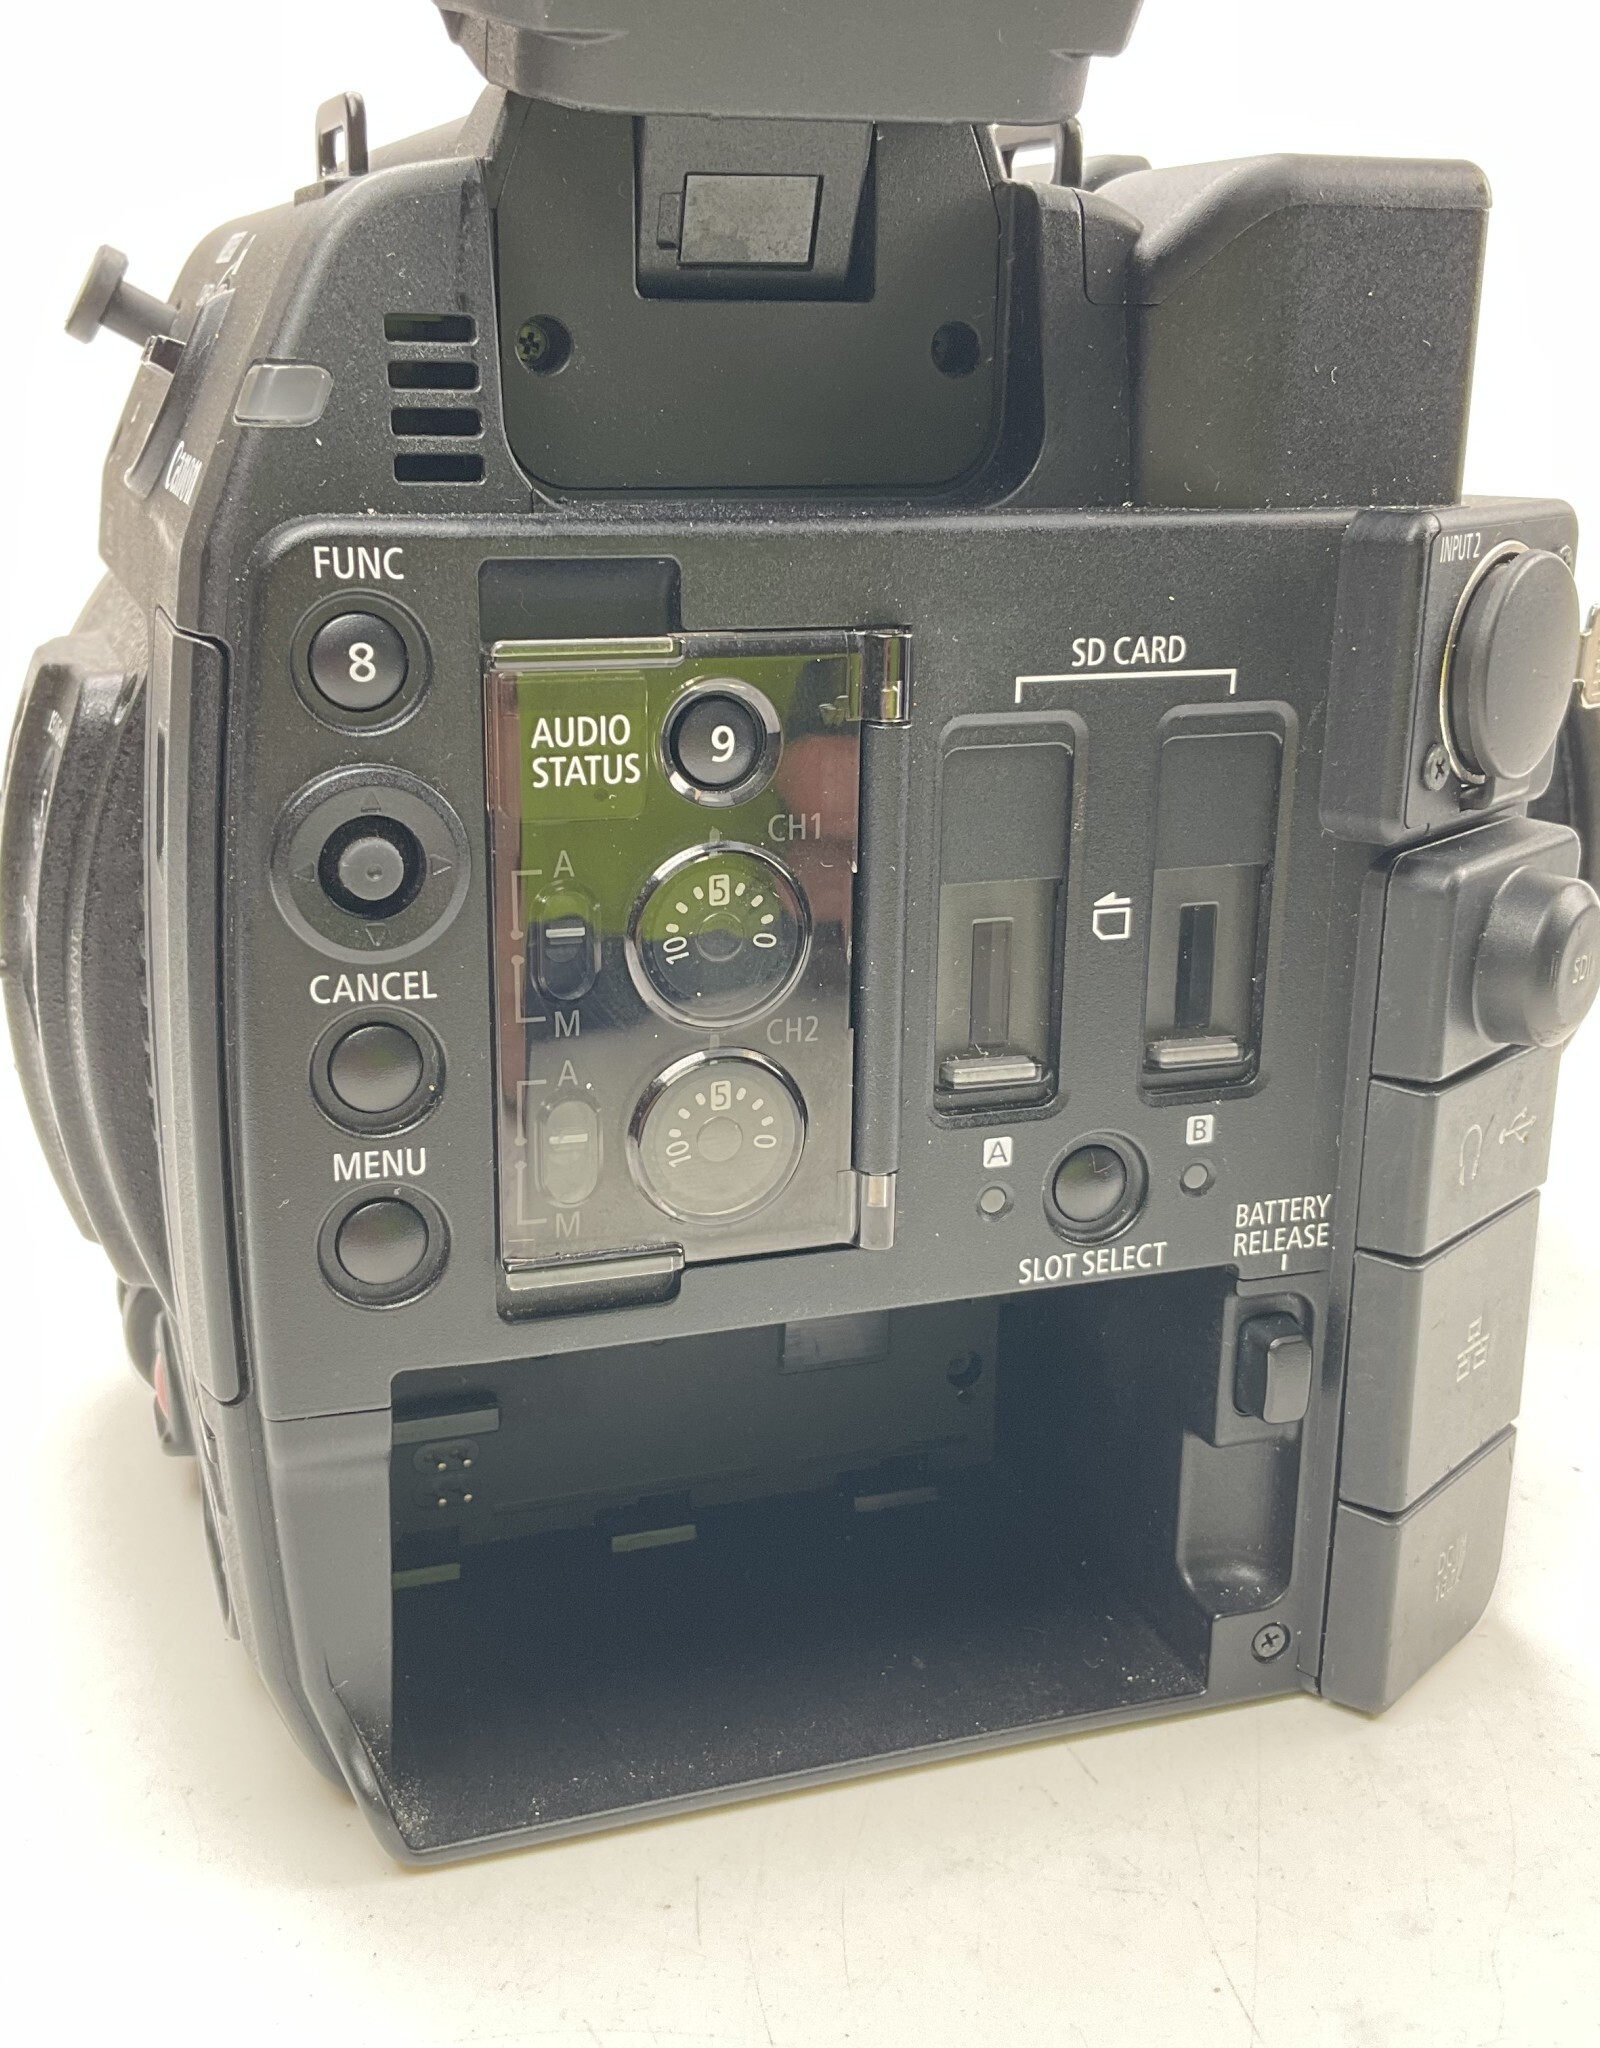 CANON Canon C200 Camera Outifit in Jason Case Used Good